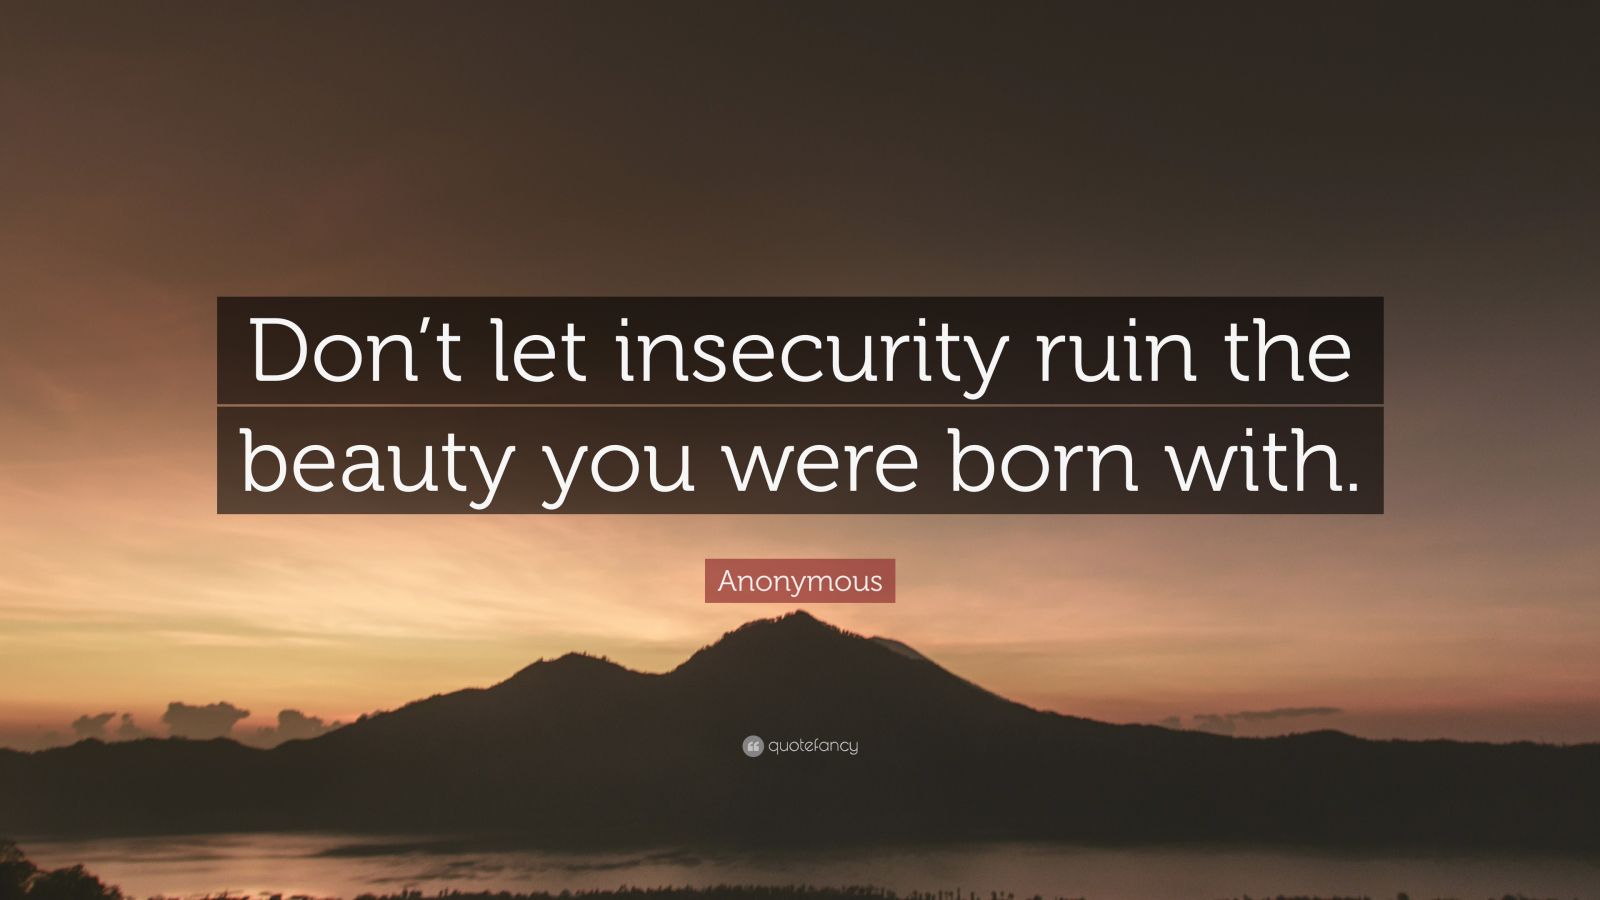 Anonymous Quote: “Don’t let insecurity ruin the beauty you were born